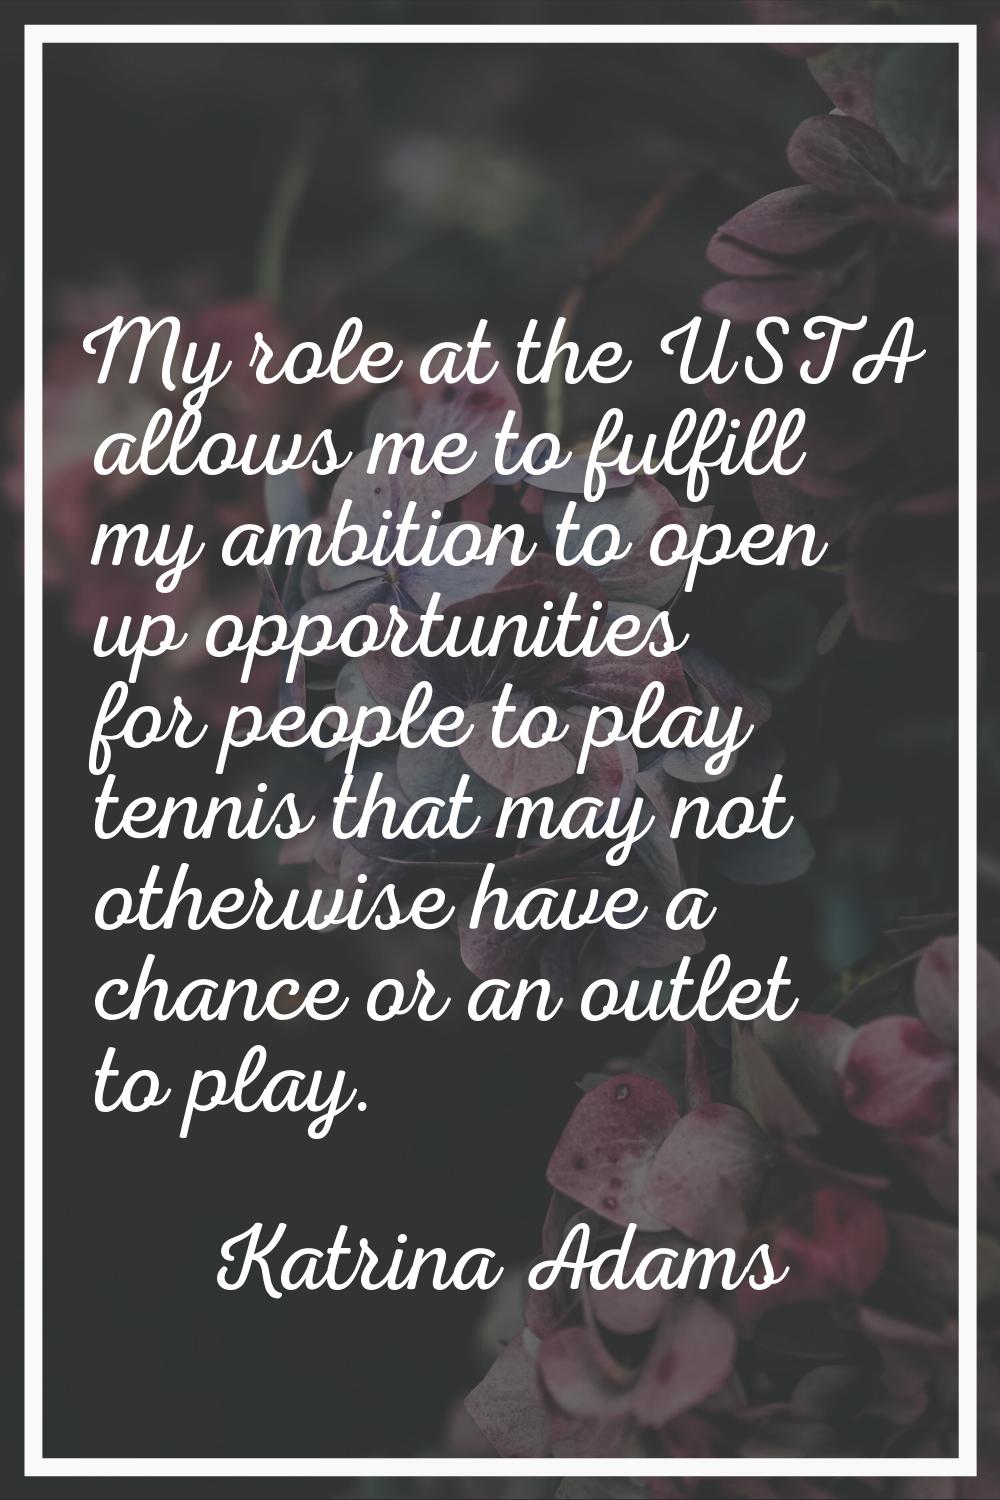 My role at the USTA allows me to fulfill my ambition to open up opportunities for people to play te